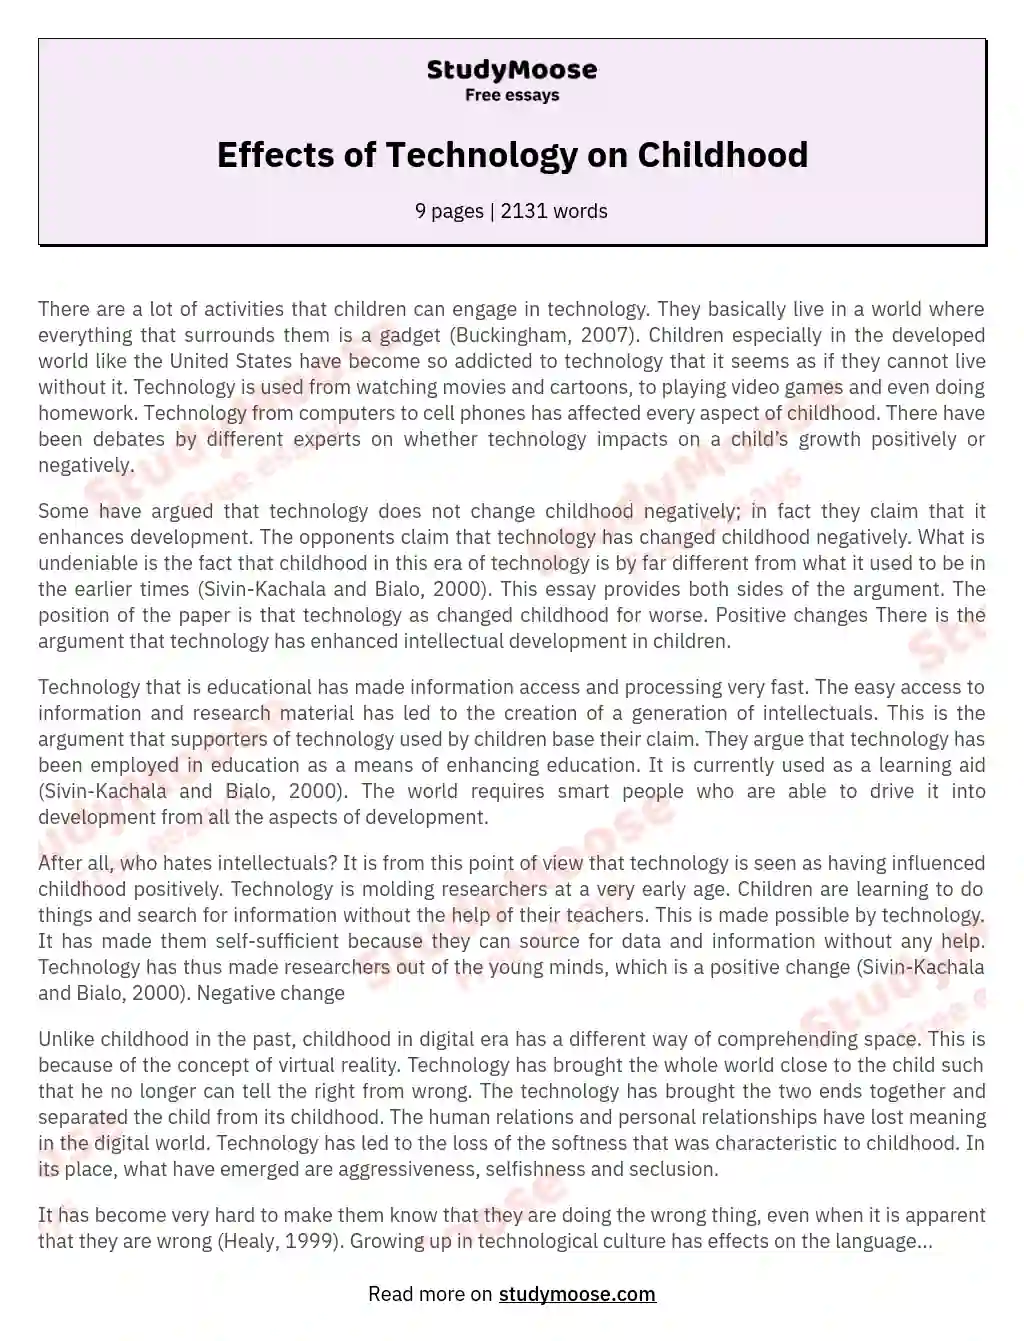 Effects of Technology on Childhood essay